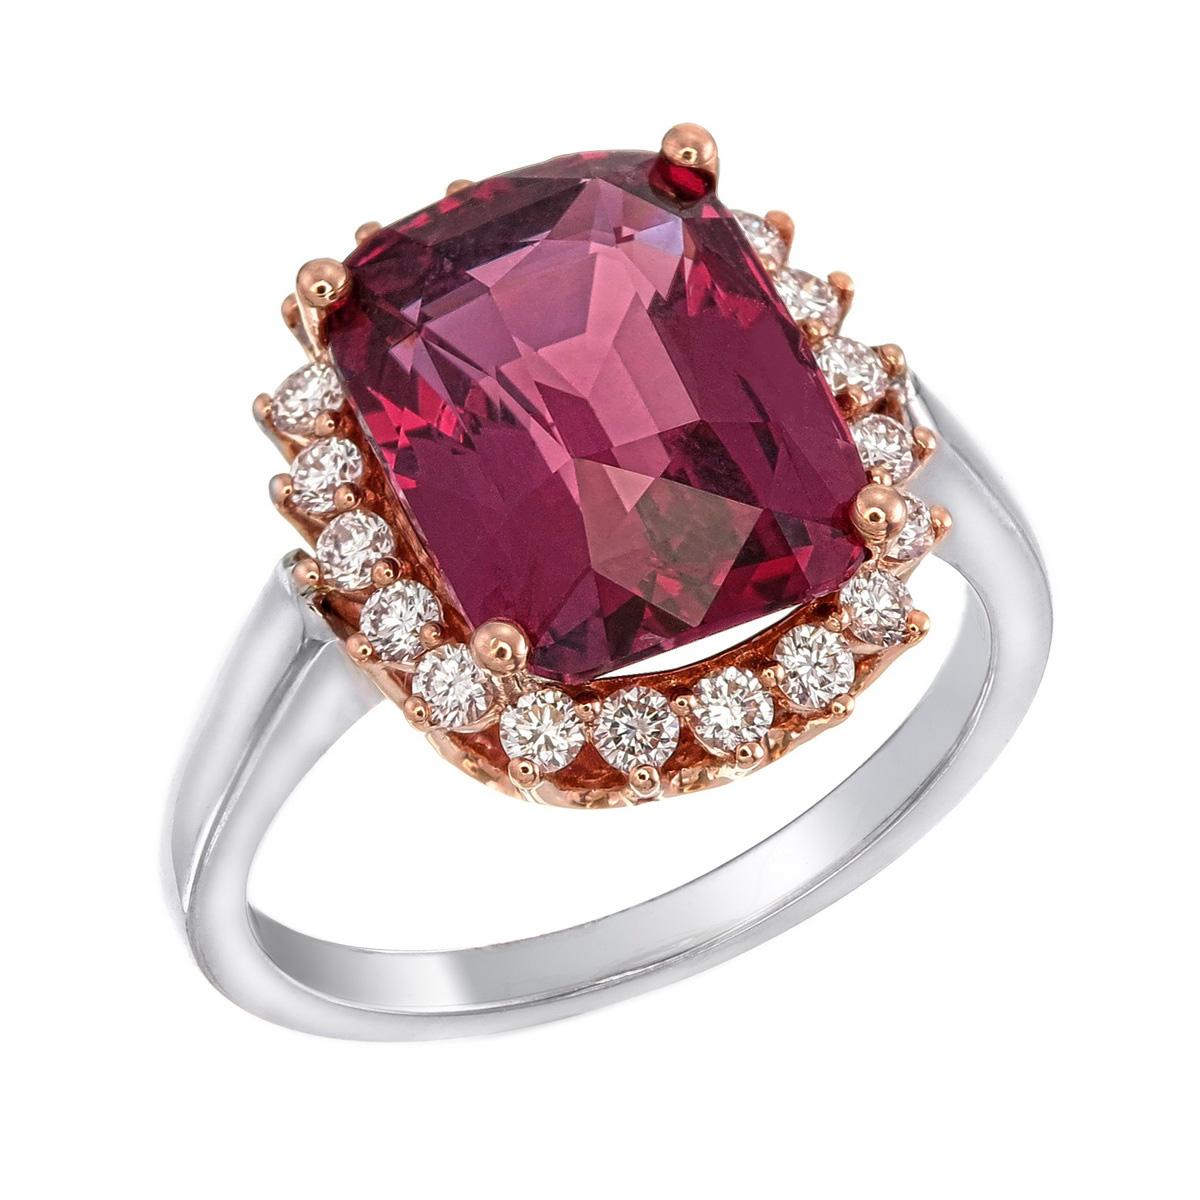 Orloff of Denmark's own; ''Scarlet Wreath'
Gorgeous 6.40 carat pinkish red spinel cocktail ring set with a rose gold crown of 20 SI1, F-colored diamonds.
The ring features a mesmerizing central spinel gemstone, embraced by the warm hues of rose gold